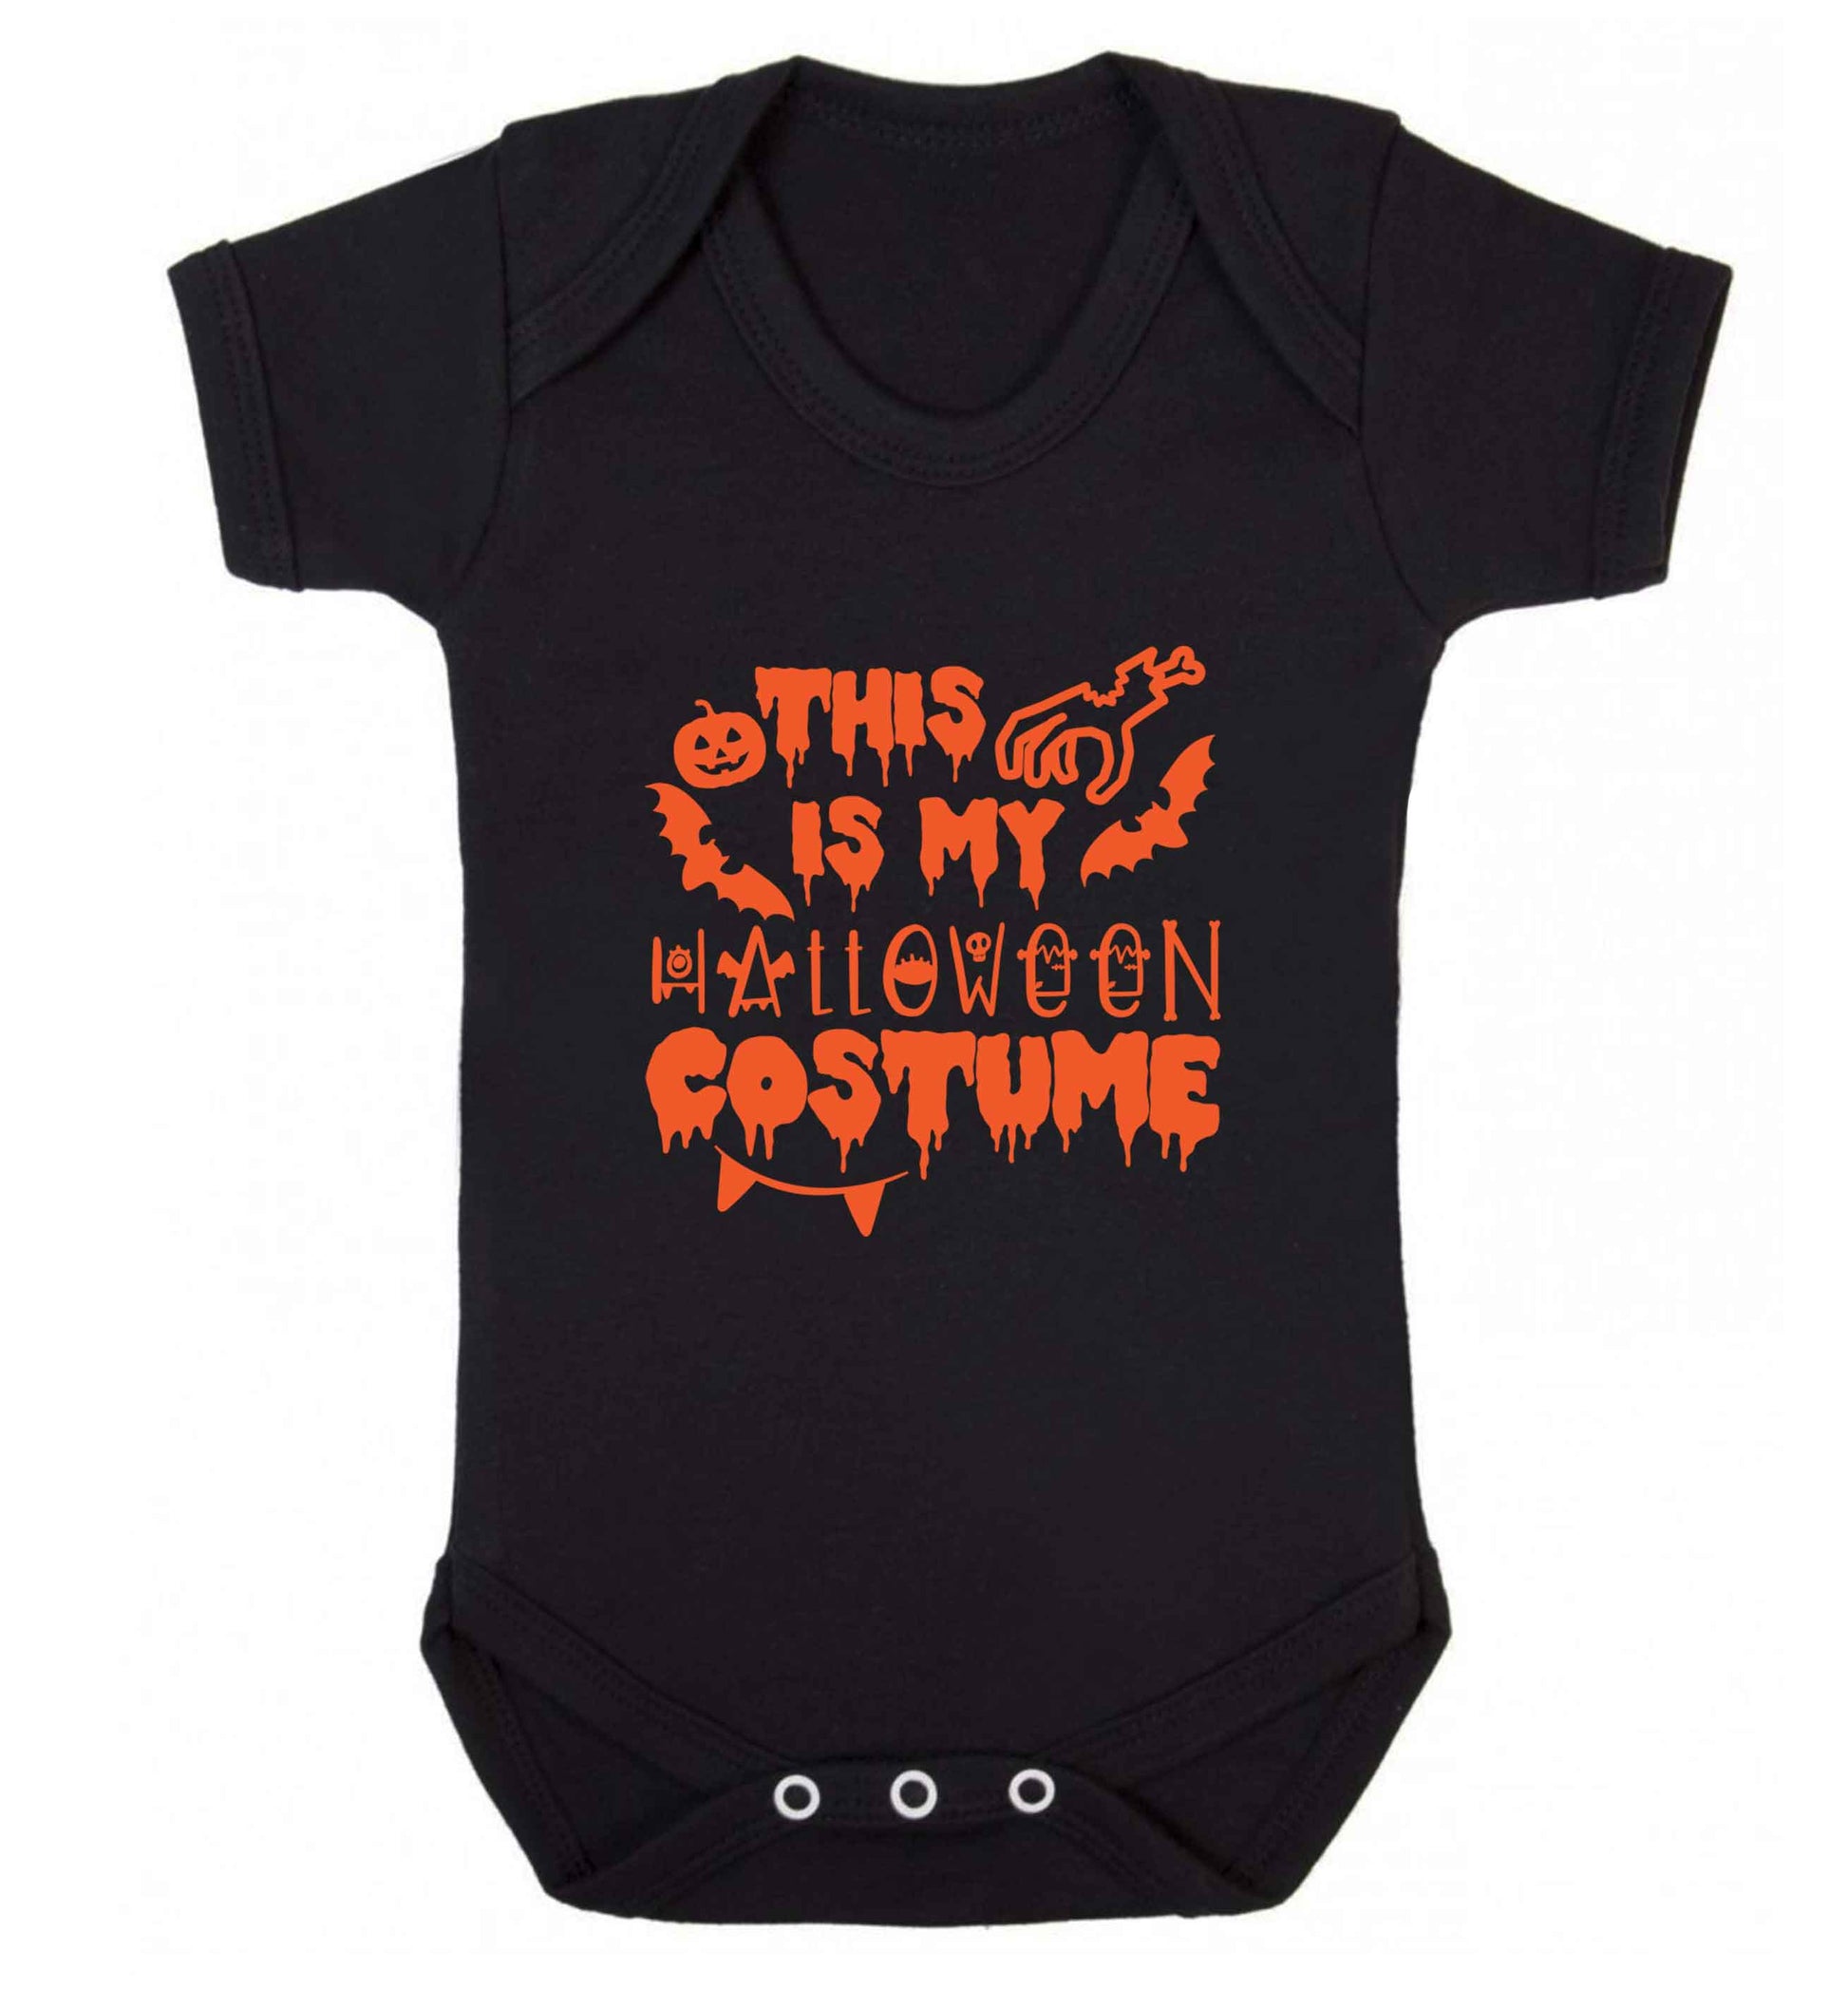 This is my halloween costume baby vest black 18-24 months